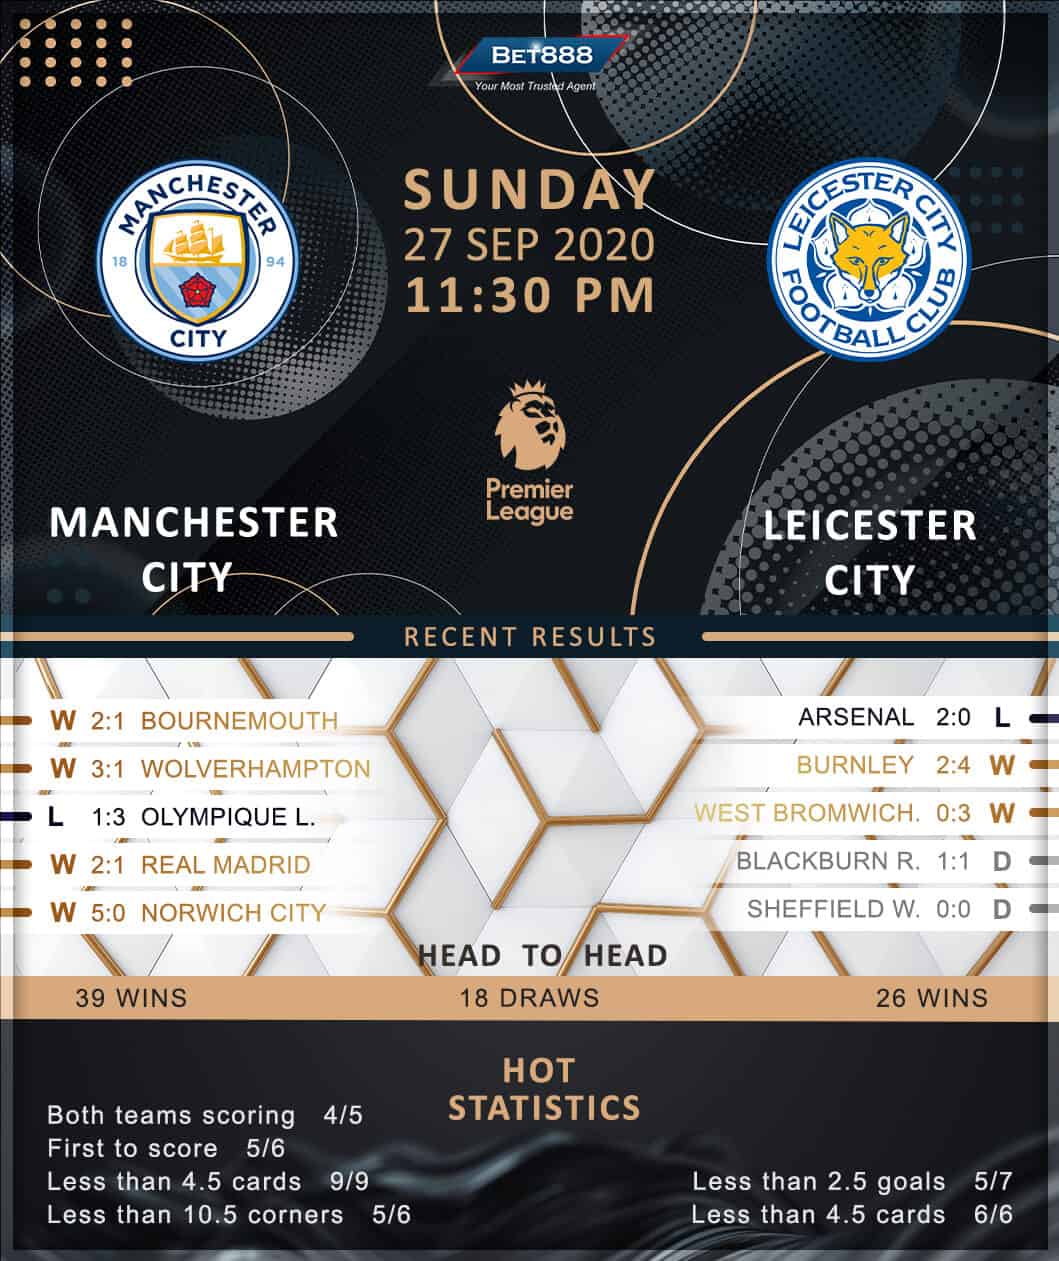 Manchester City vs Leicester City 27/09/20